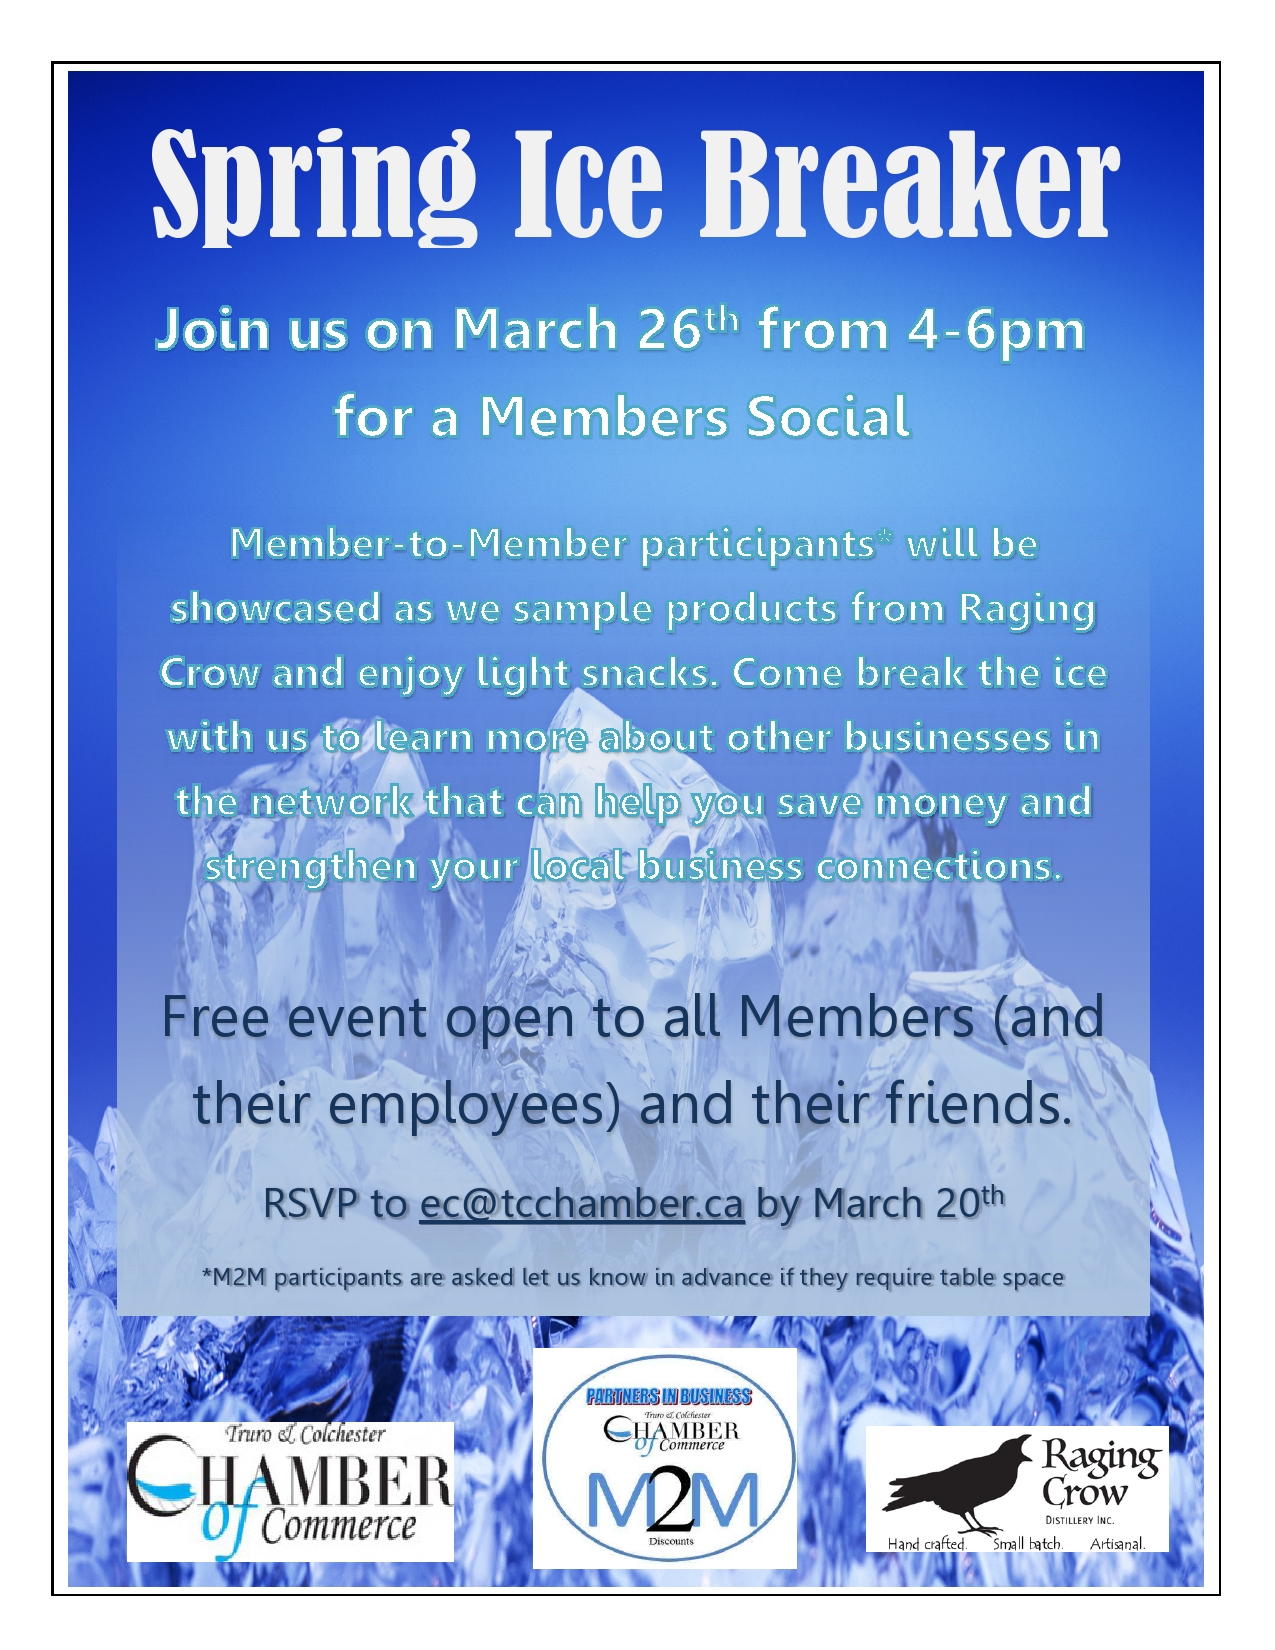 Chamber hosting Spring Ice Breaker at Raging Crow Truro & Colchester